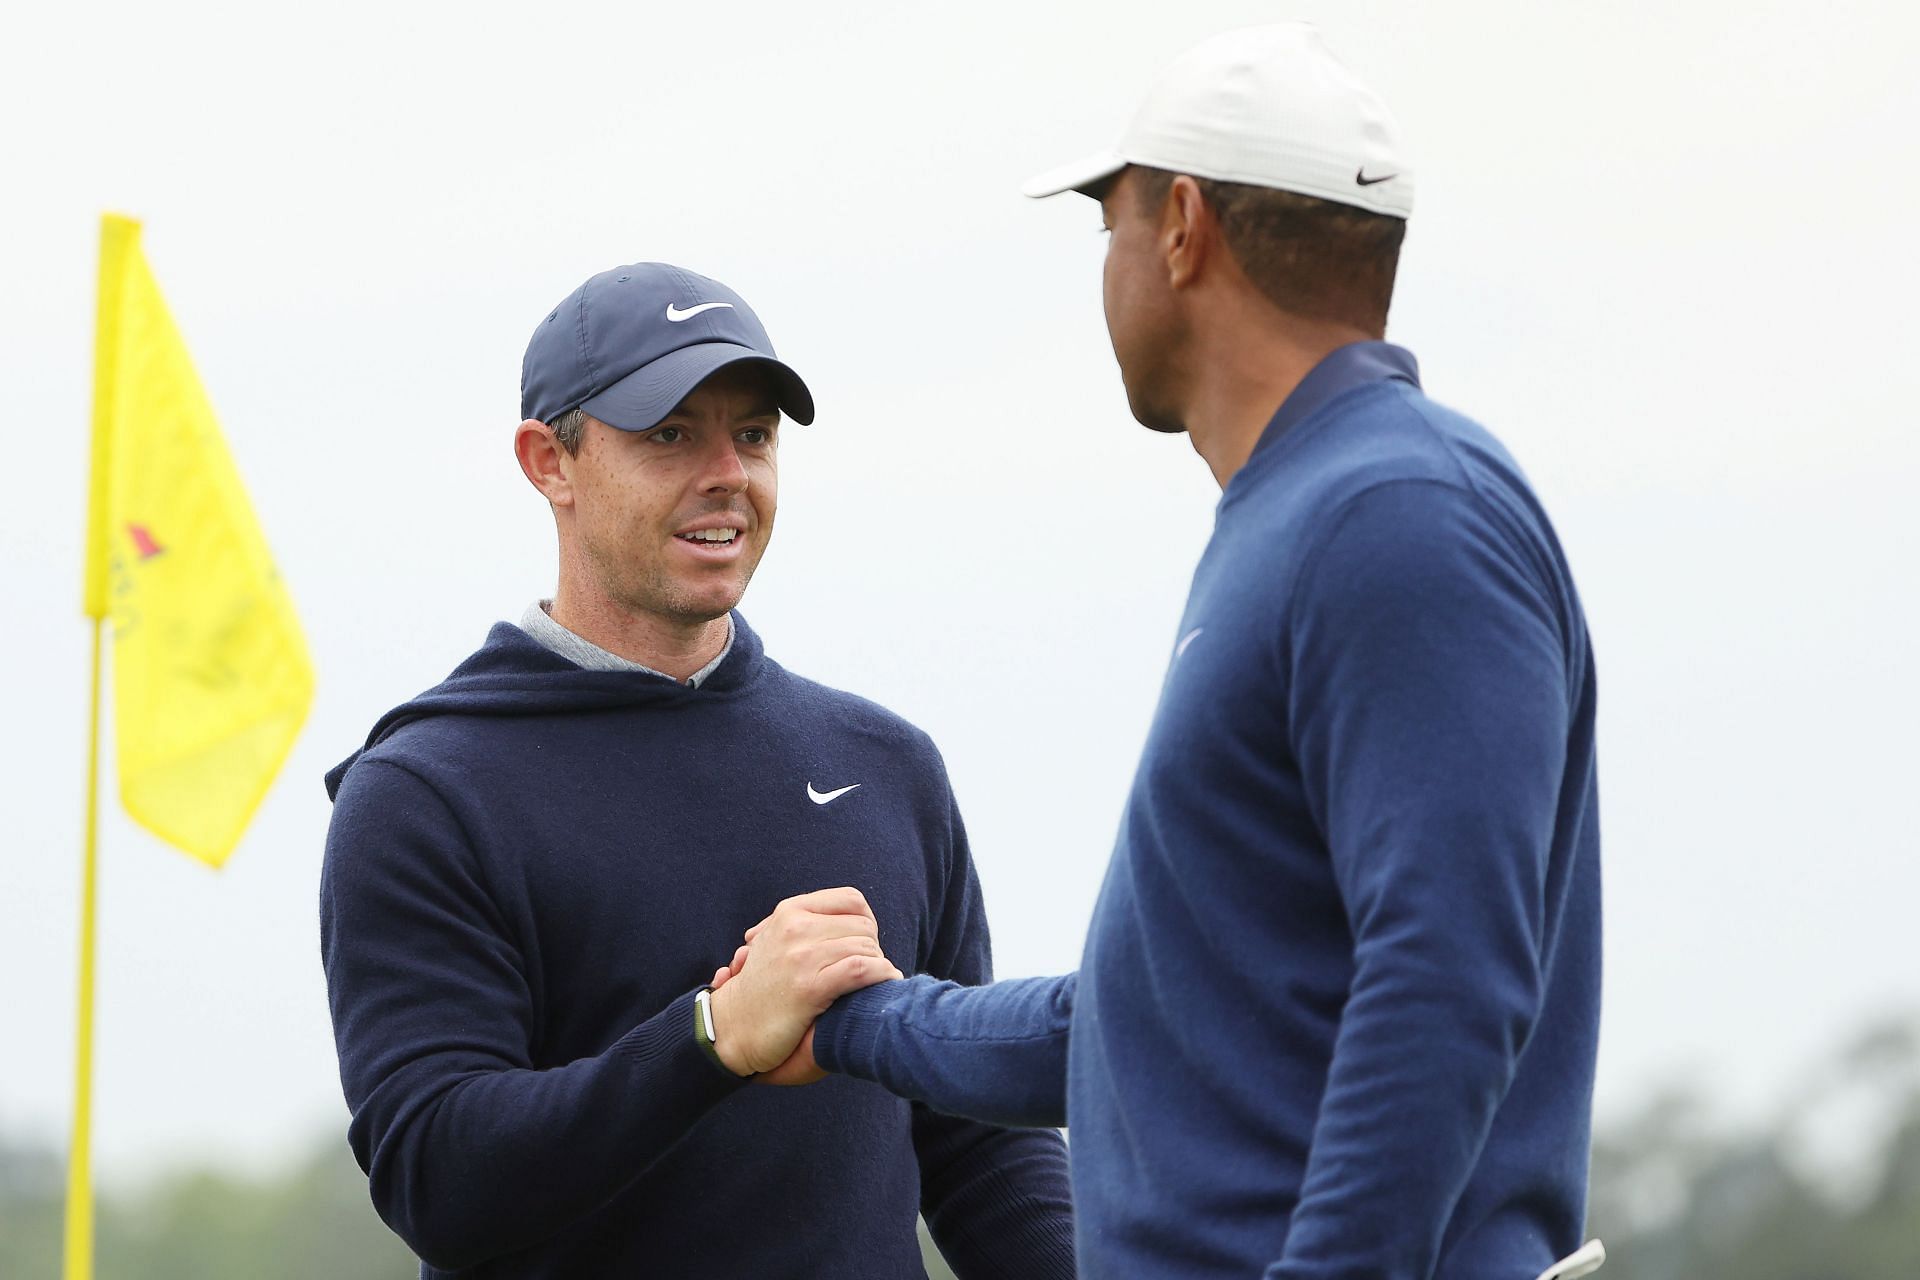 McIlroy and Woods, The Masters, 2023 - Preview Day 1 (Image via Getty).